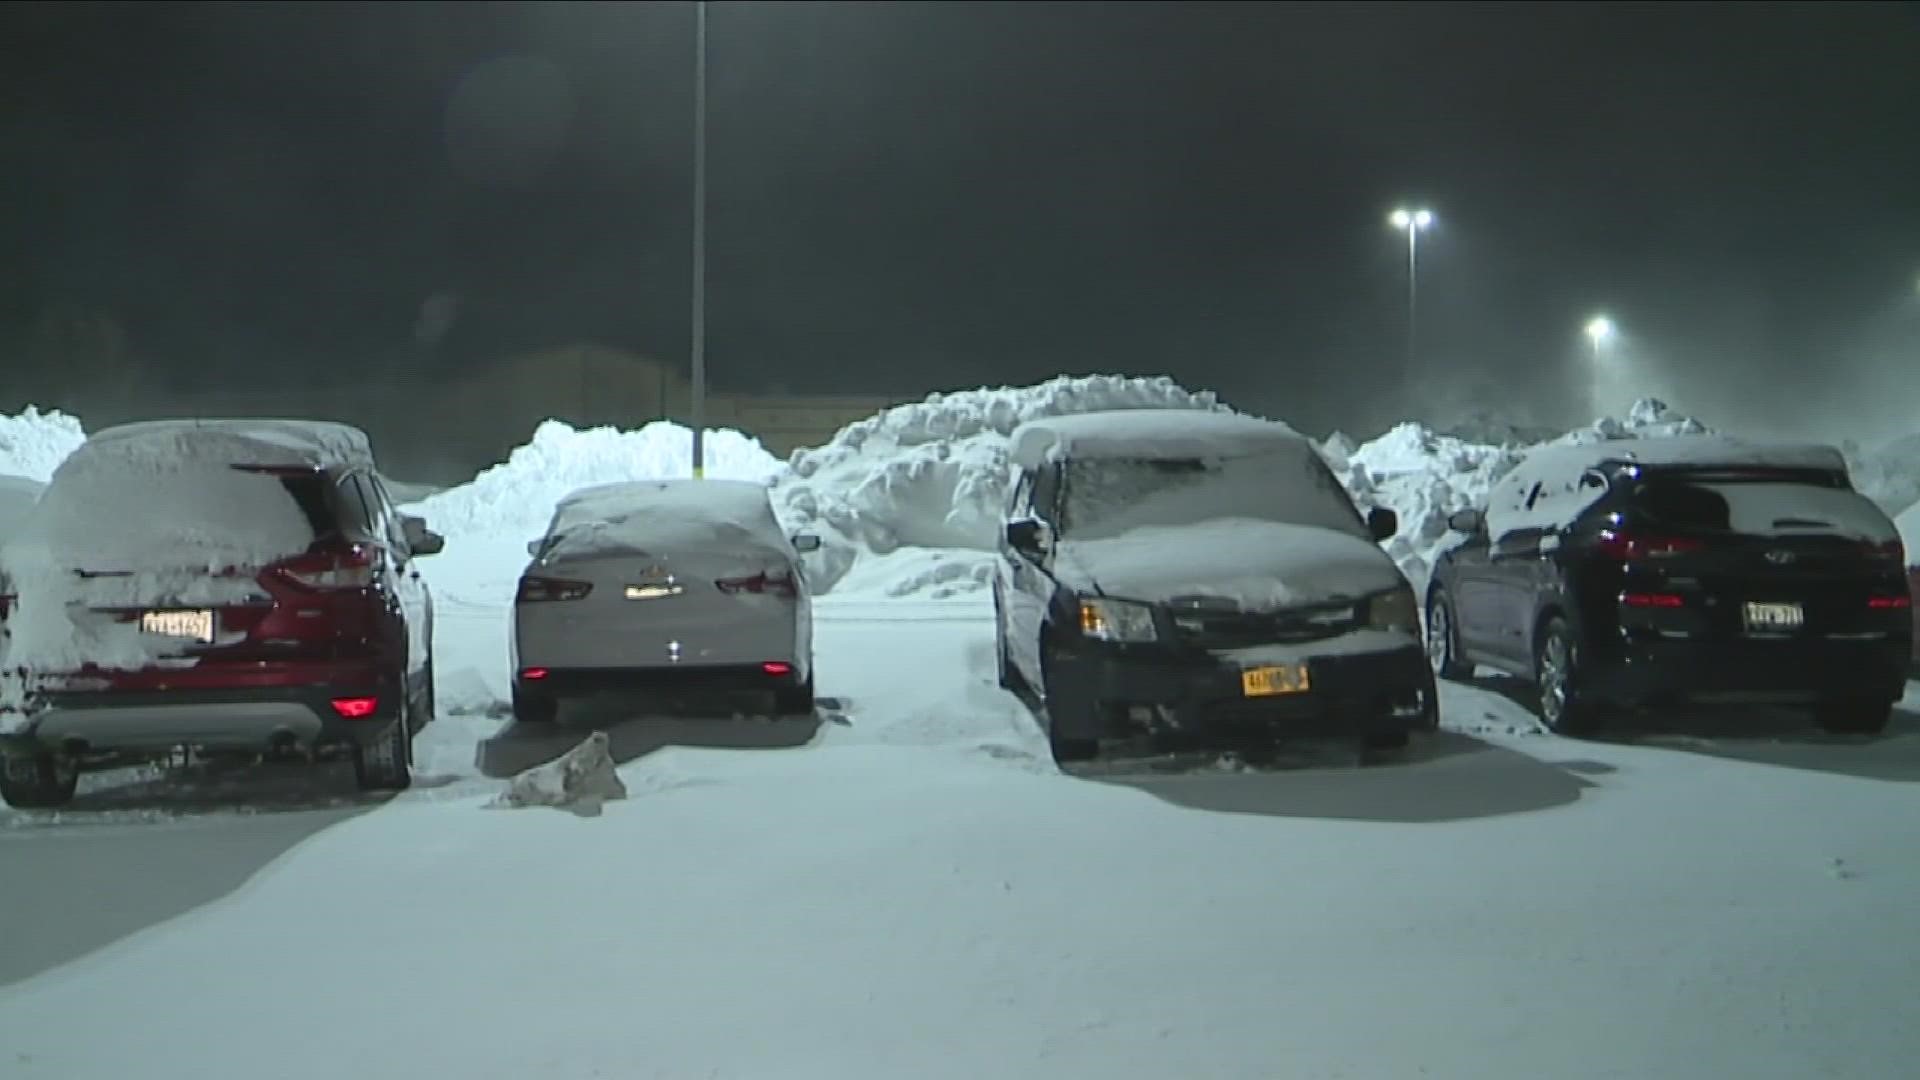 County officials created a website of vehicles that were towed during the winter storm